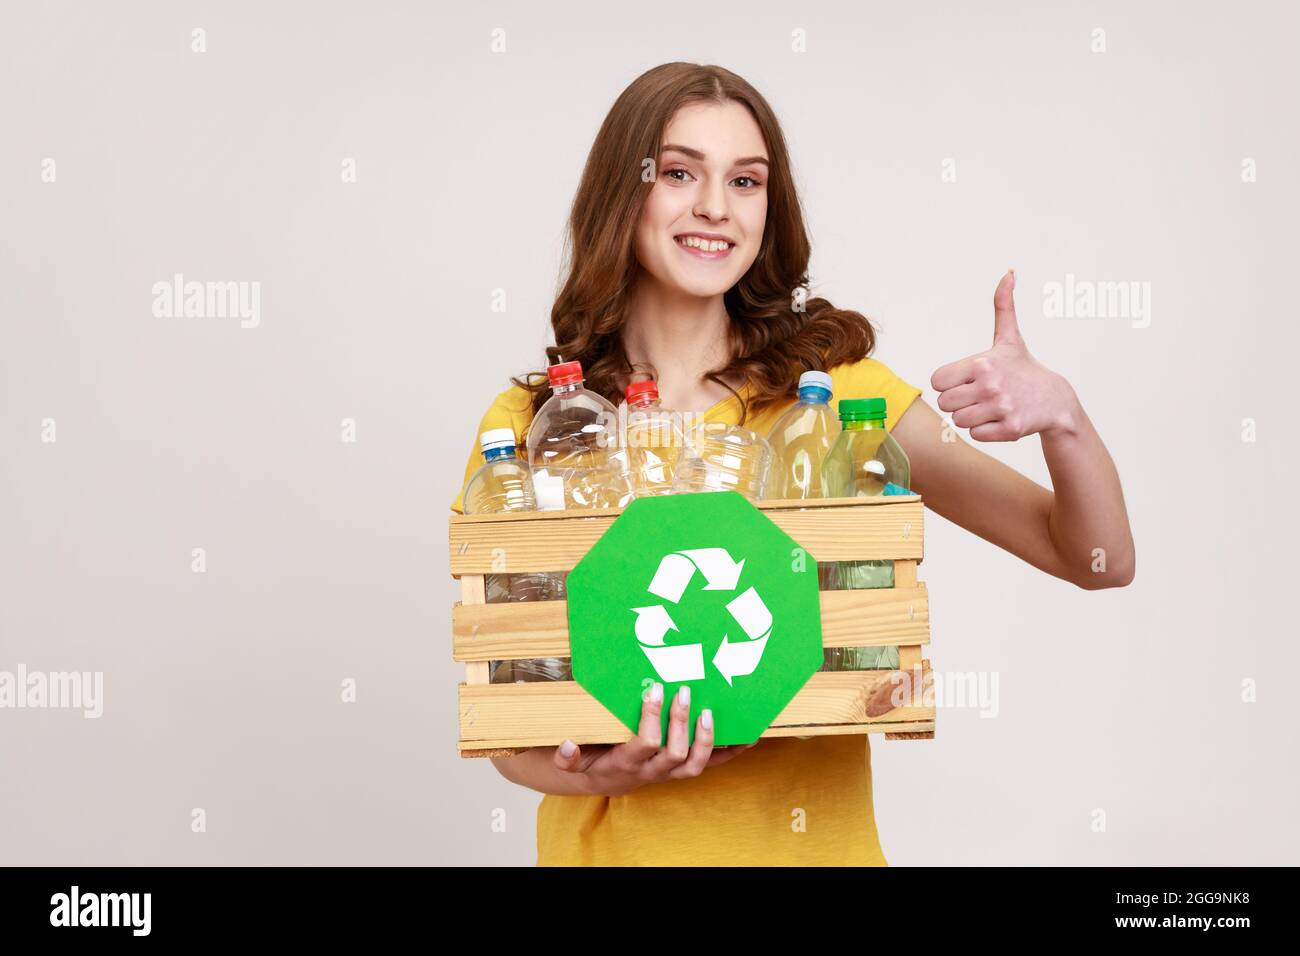 Recycling, waste sorting and sustainability concept. Smiling young female in yellow t-shirt holding box with plastic bottles and showing thumb up. Ind Stock Photo